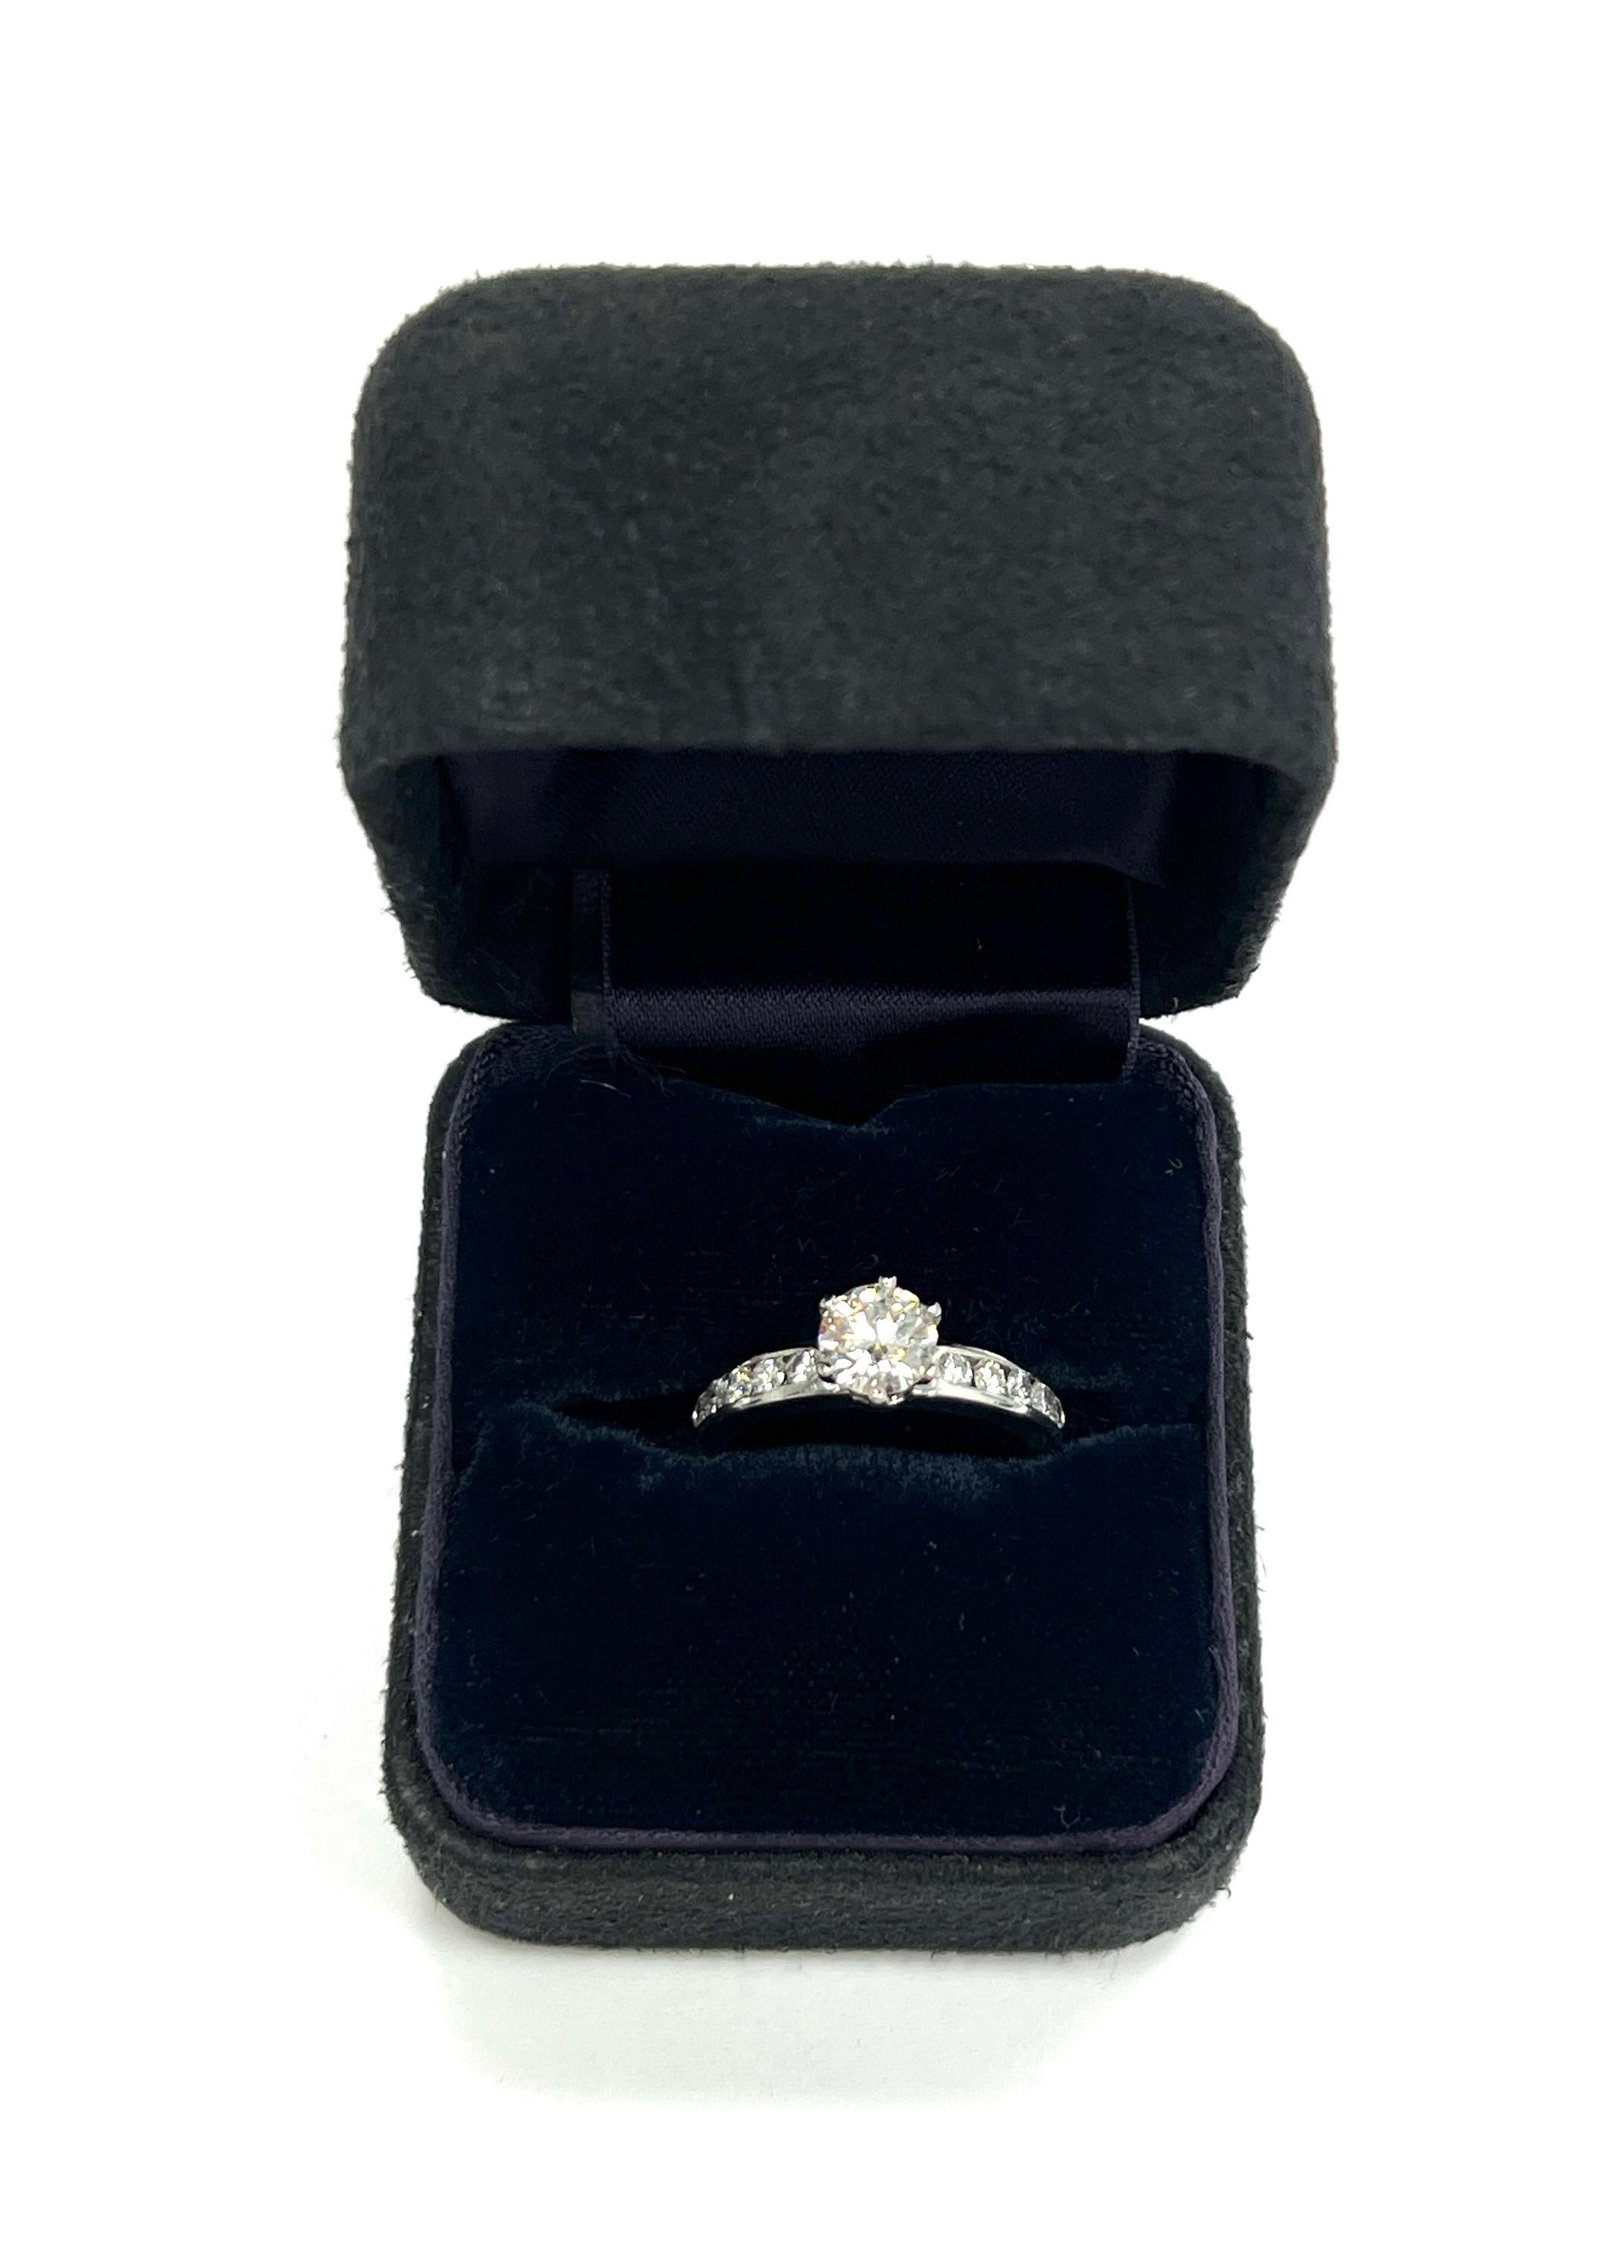 Tiffany & Co. 0.77 Carat Diamond Solitaire Engagement Ring For Sale 11